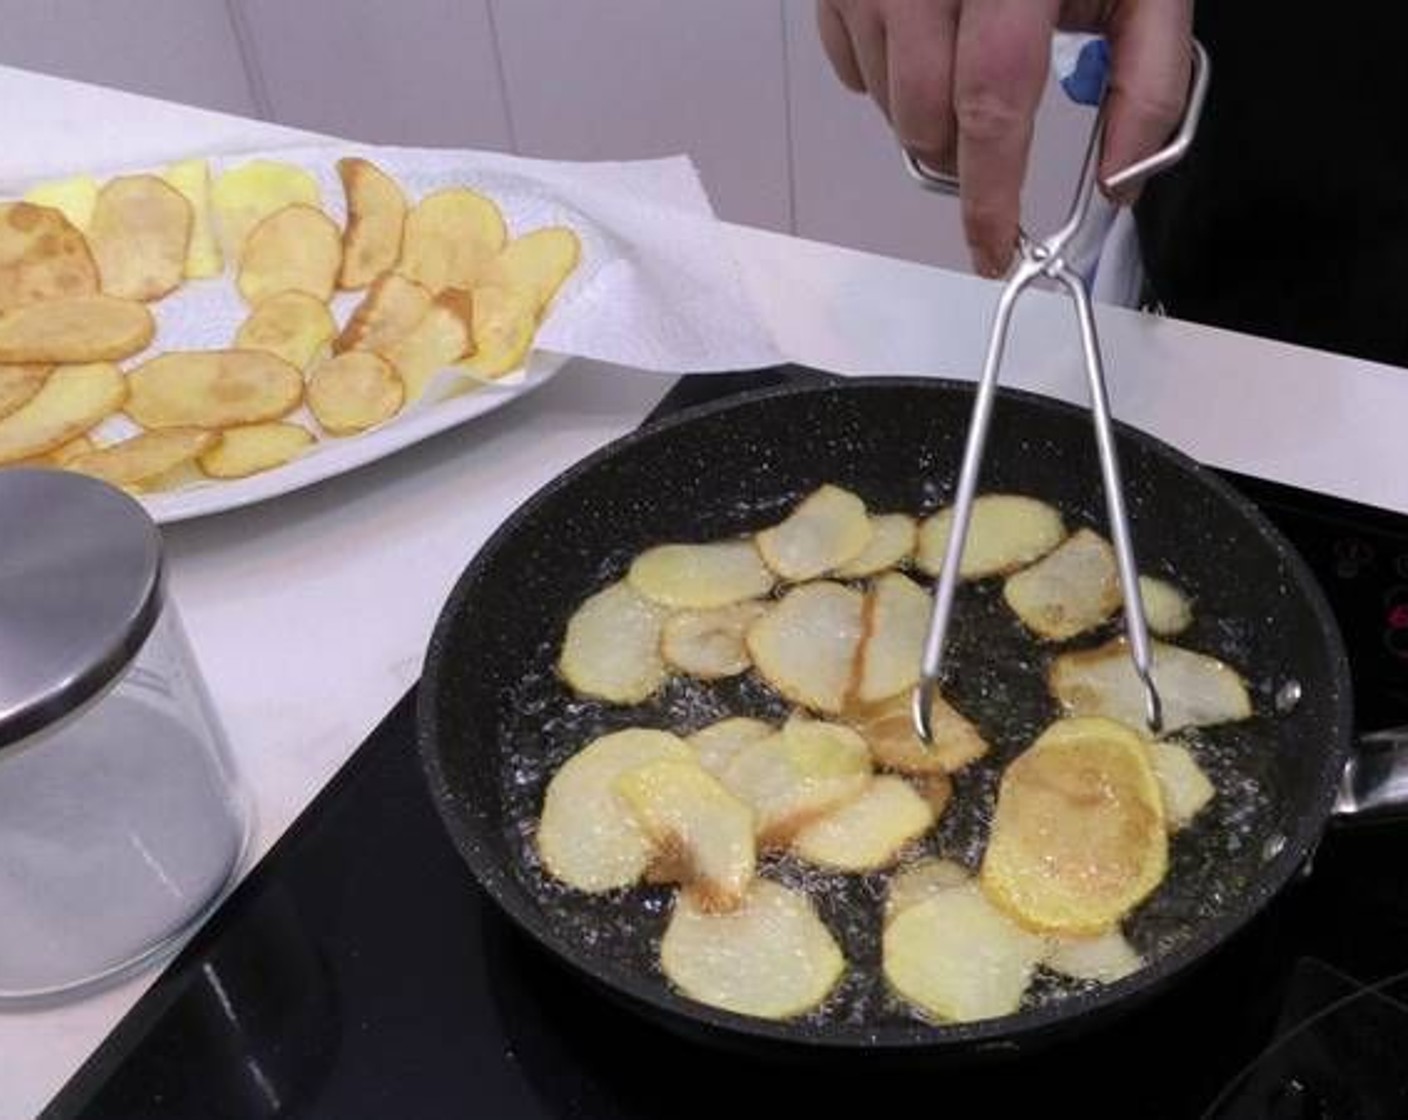 step 3 Fry in a pan with a very generous layer of Olive Oil (as needed). Remove them as they reach a golden color and place them on a plate with a paper towel to drain the excess oil.